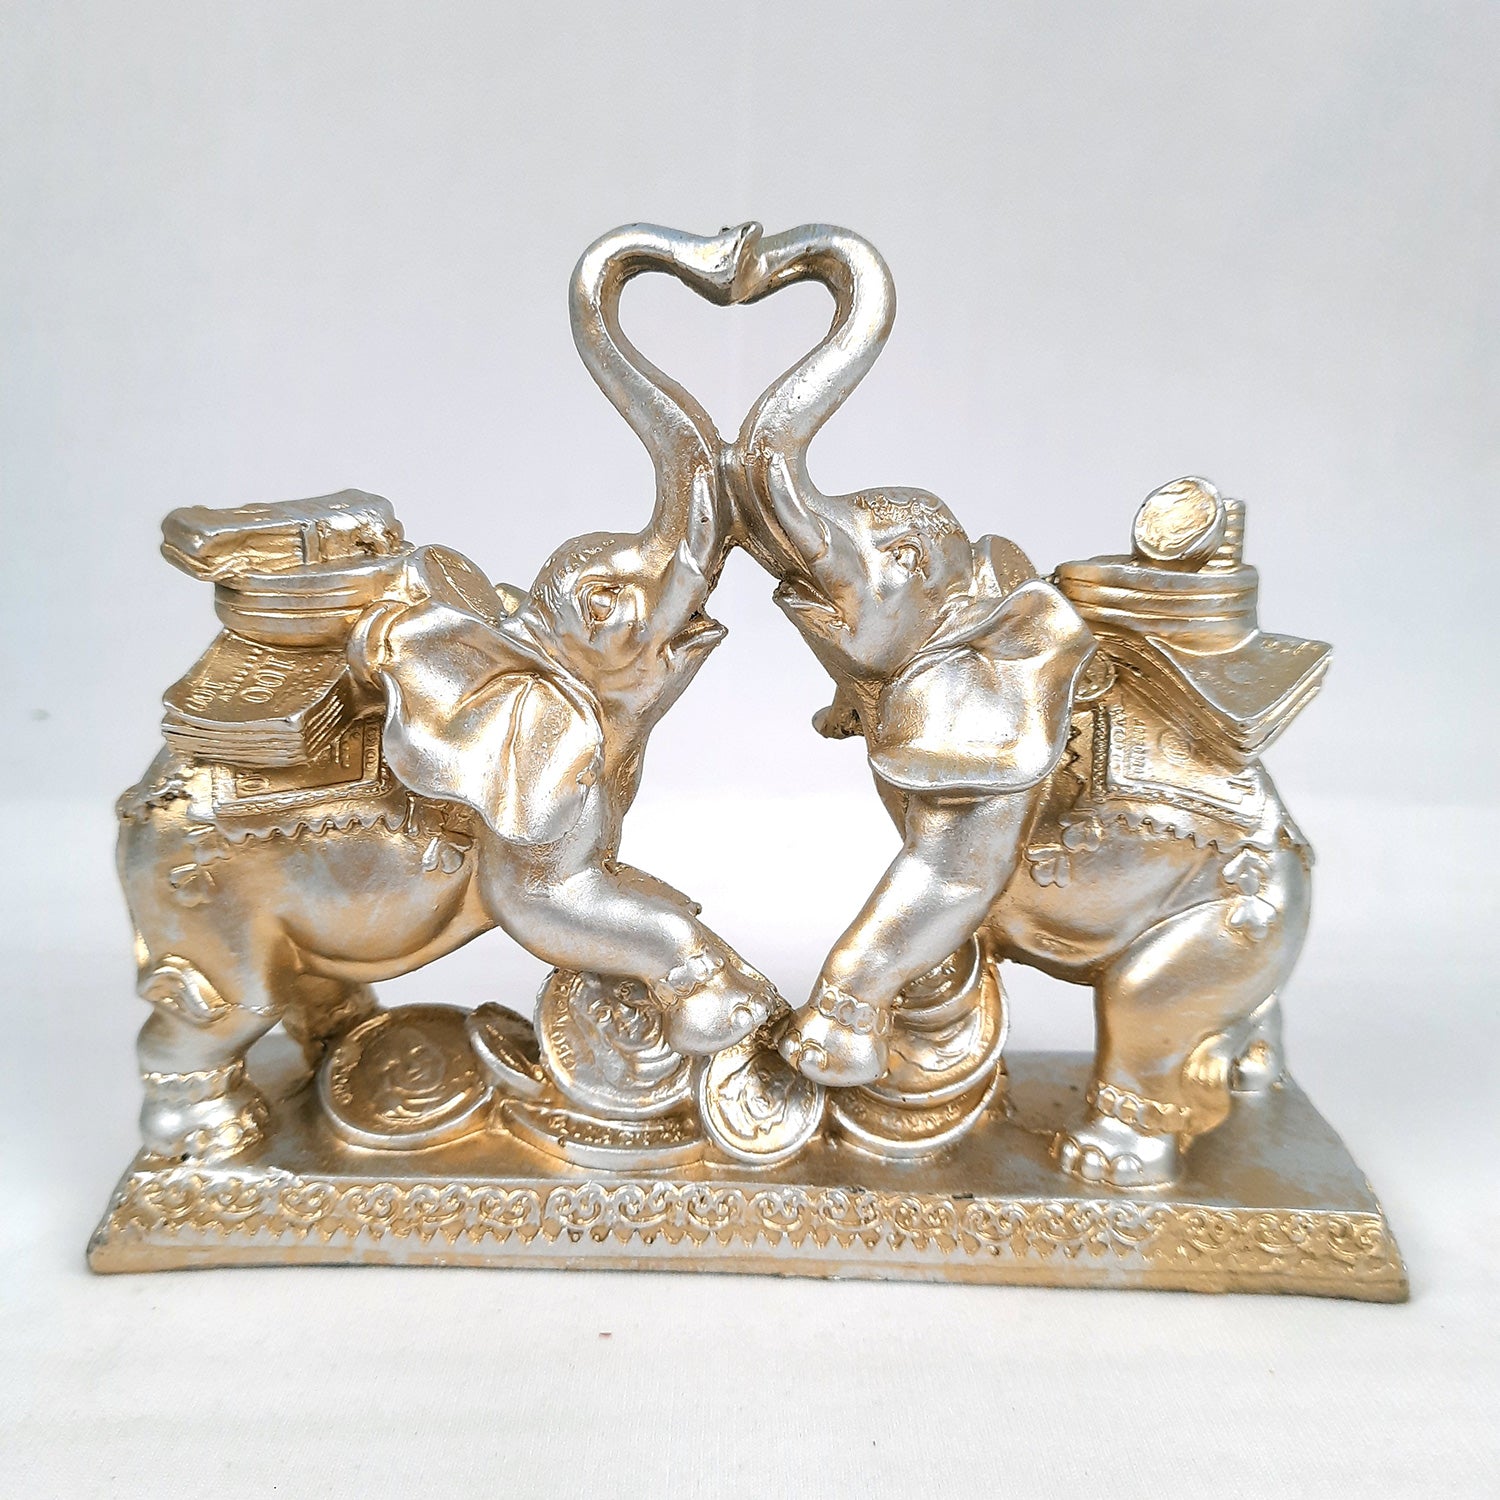 Elephant Statue Showpiece | Fengshui Trunk Up Elephant Figurine With Money & Gold Coins - For Vastu, Good Fortune, Wealth, Strength | For Home Decor, Living Room, Office & Gift - 7 inch - Apkamart